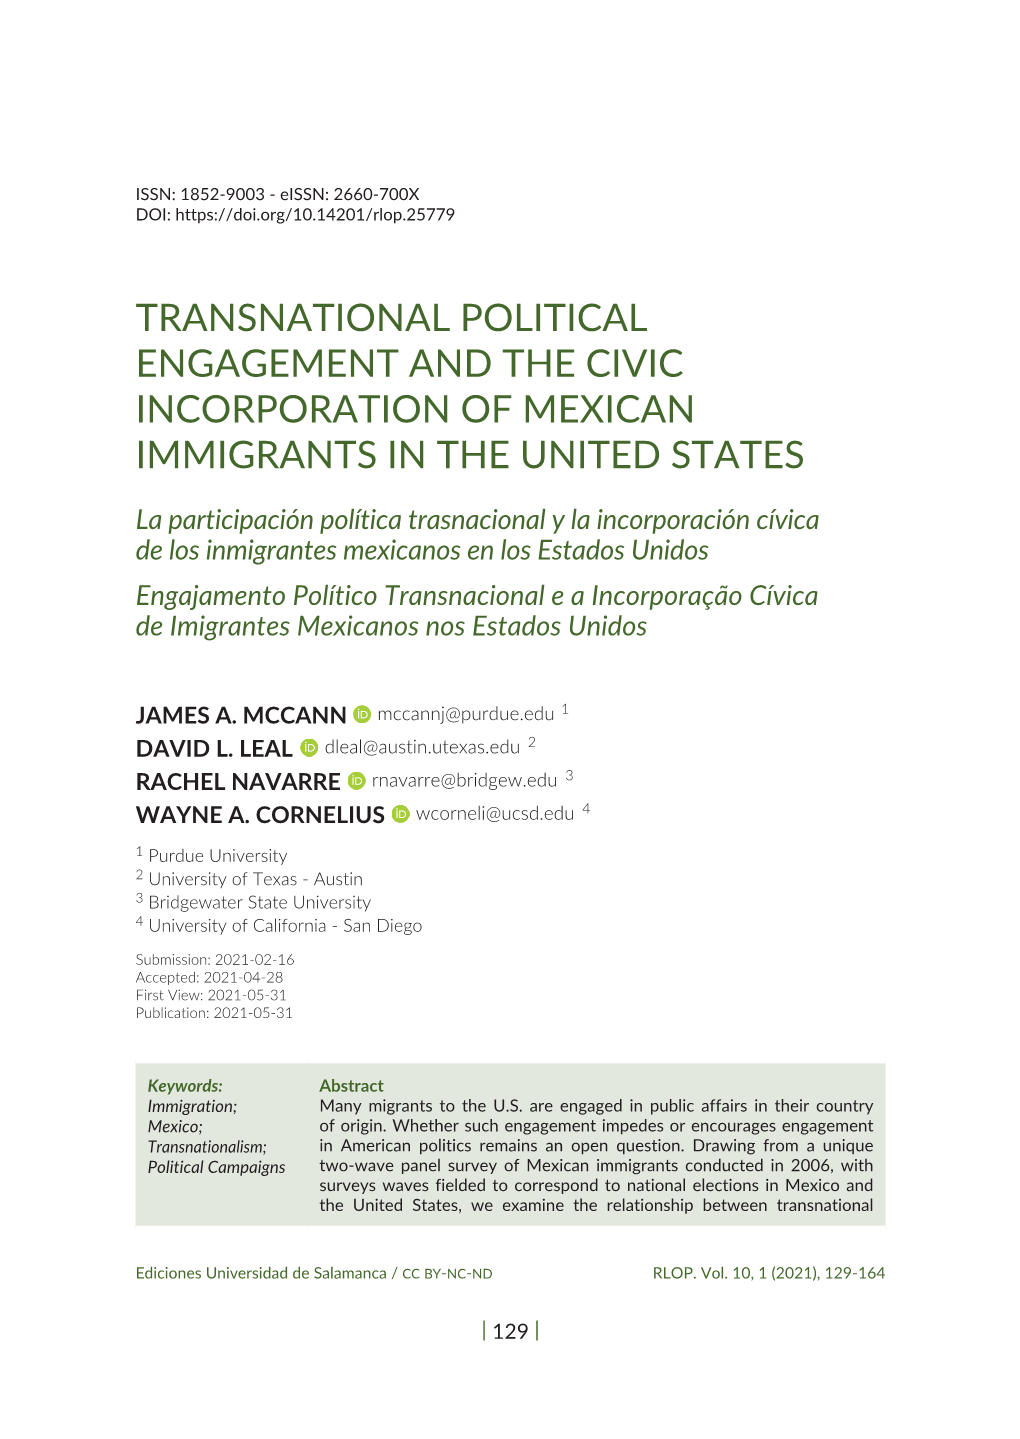 Transnational Political Engagement and the Civic Incorporation of Mexican Immigrants in the United States